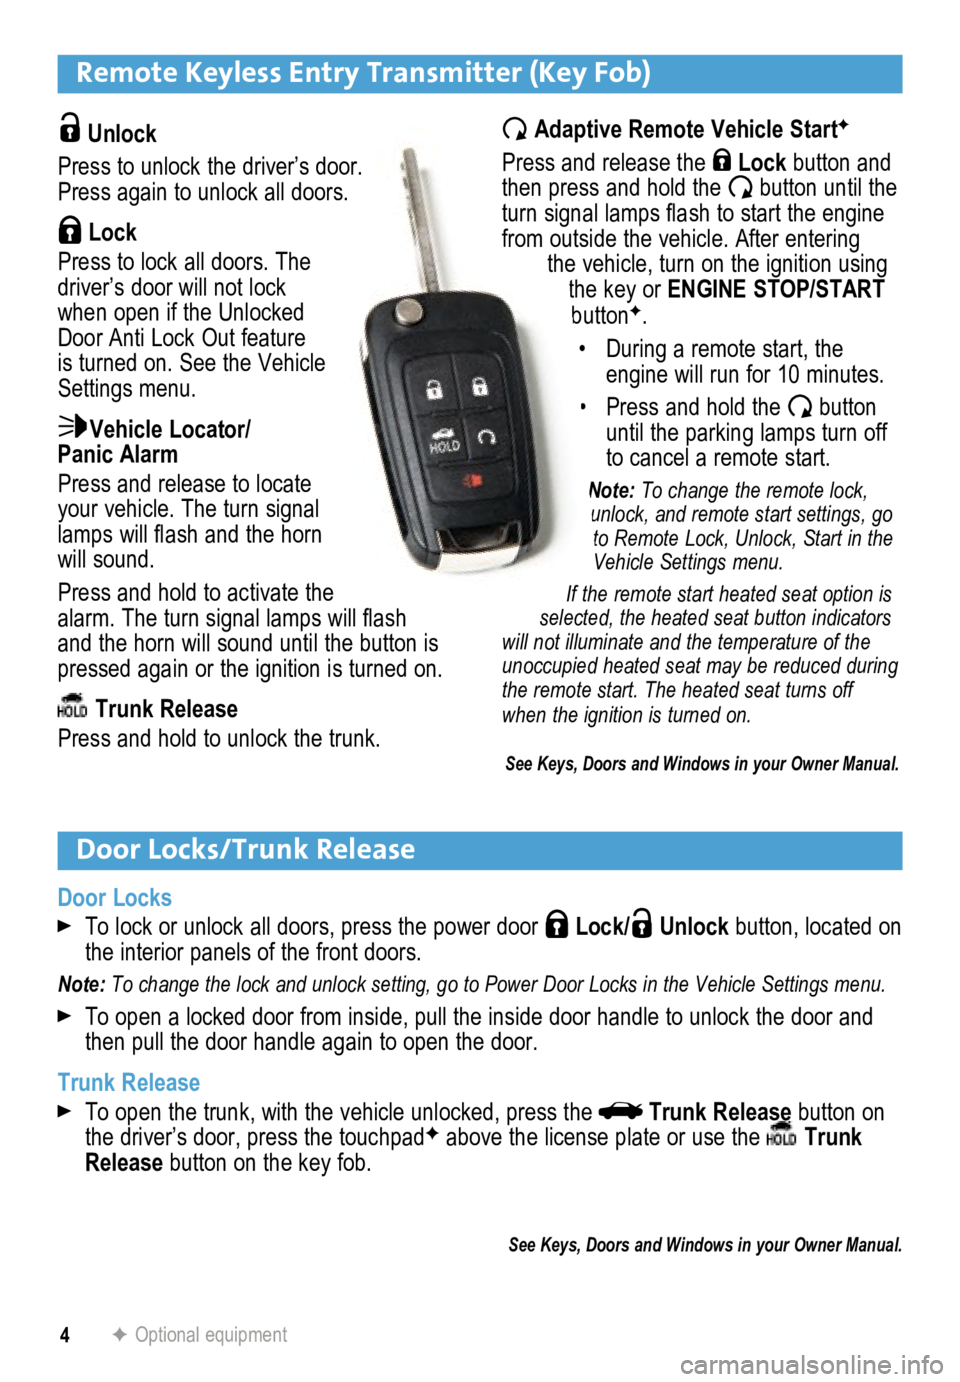 BUICK LACROSSE 2015  Get To Know Guide 4
Remote Keyless Entry Transmitter (Key Fob) 
F Optional equipment
 Unlock 
Press to unlock the driver’s door. 
Press again to unlock all doors.
 Lock
Press to lock all doors. The 
driver’s door w